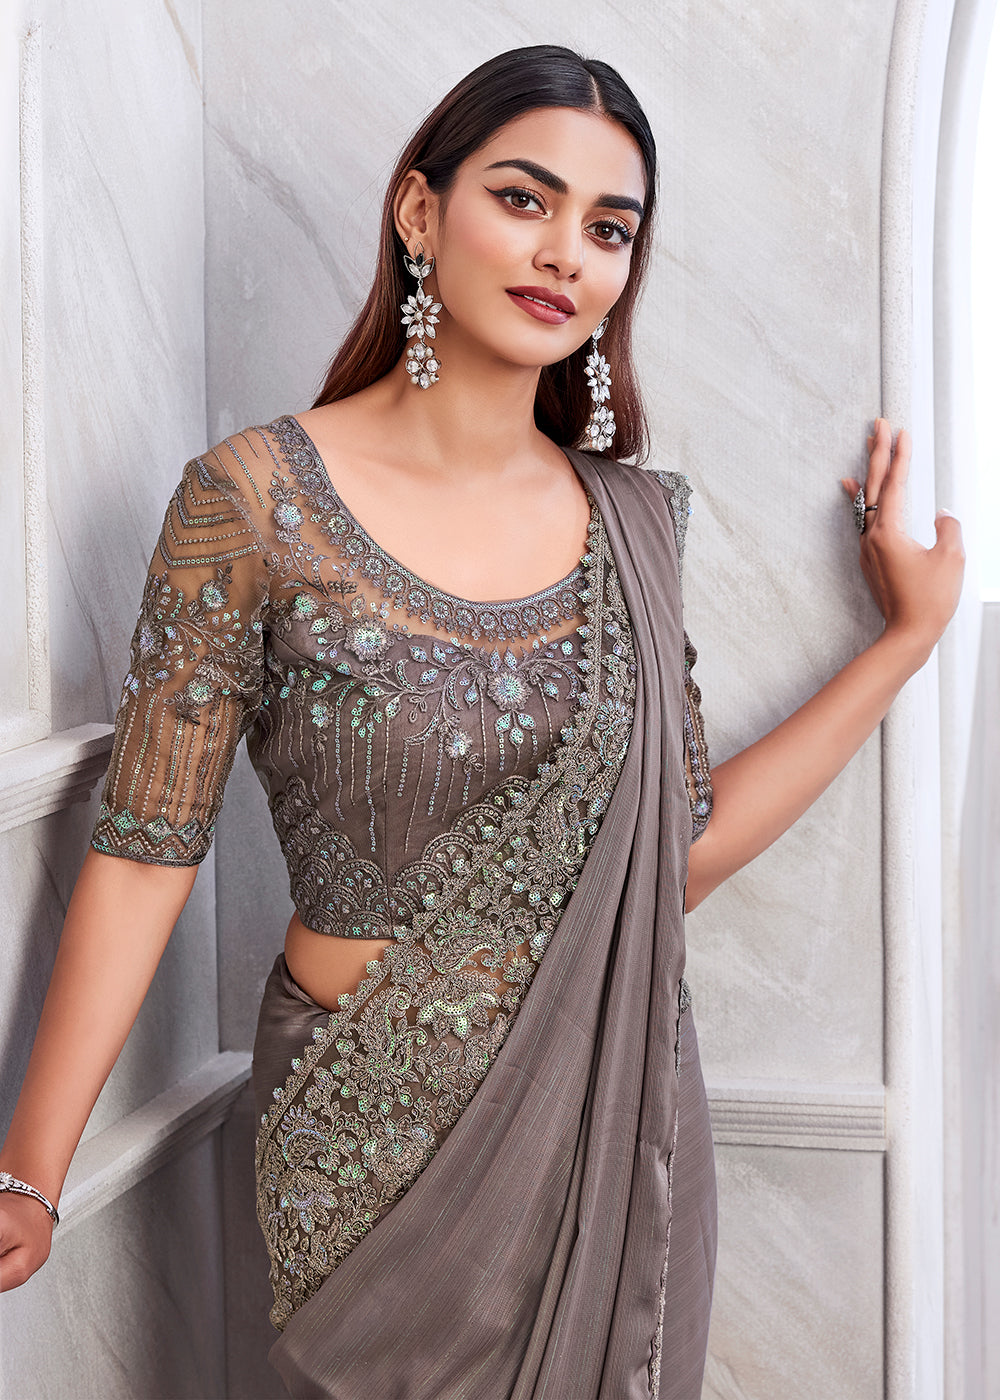 Buy Now Lovely Greyish Mauve Silk Embroidered Designer Saree Online in USA, UK, Canada & Worldwide at Empress Clothing. 